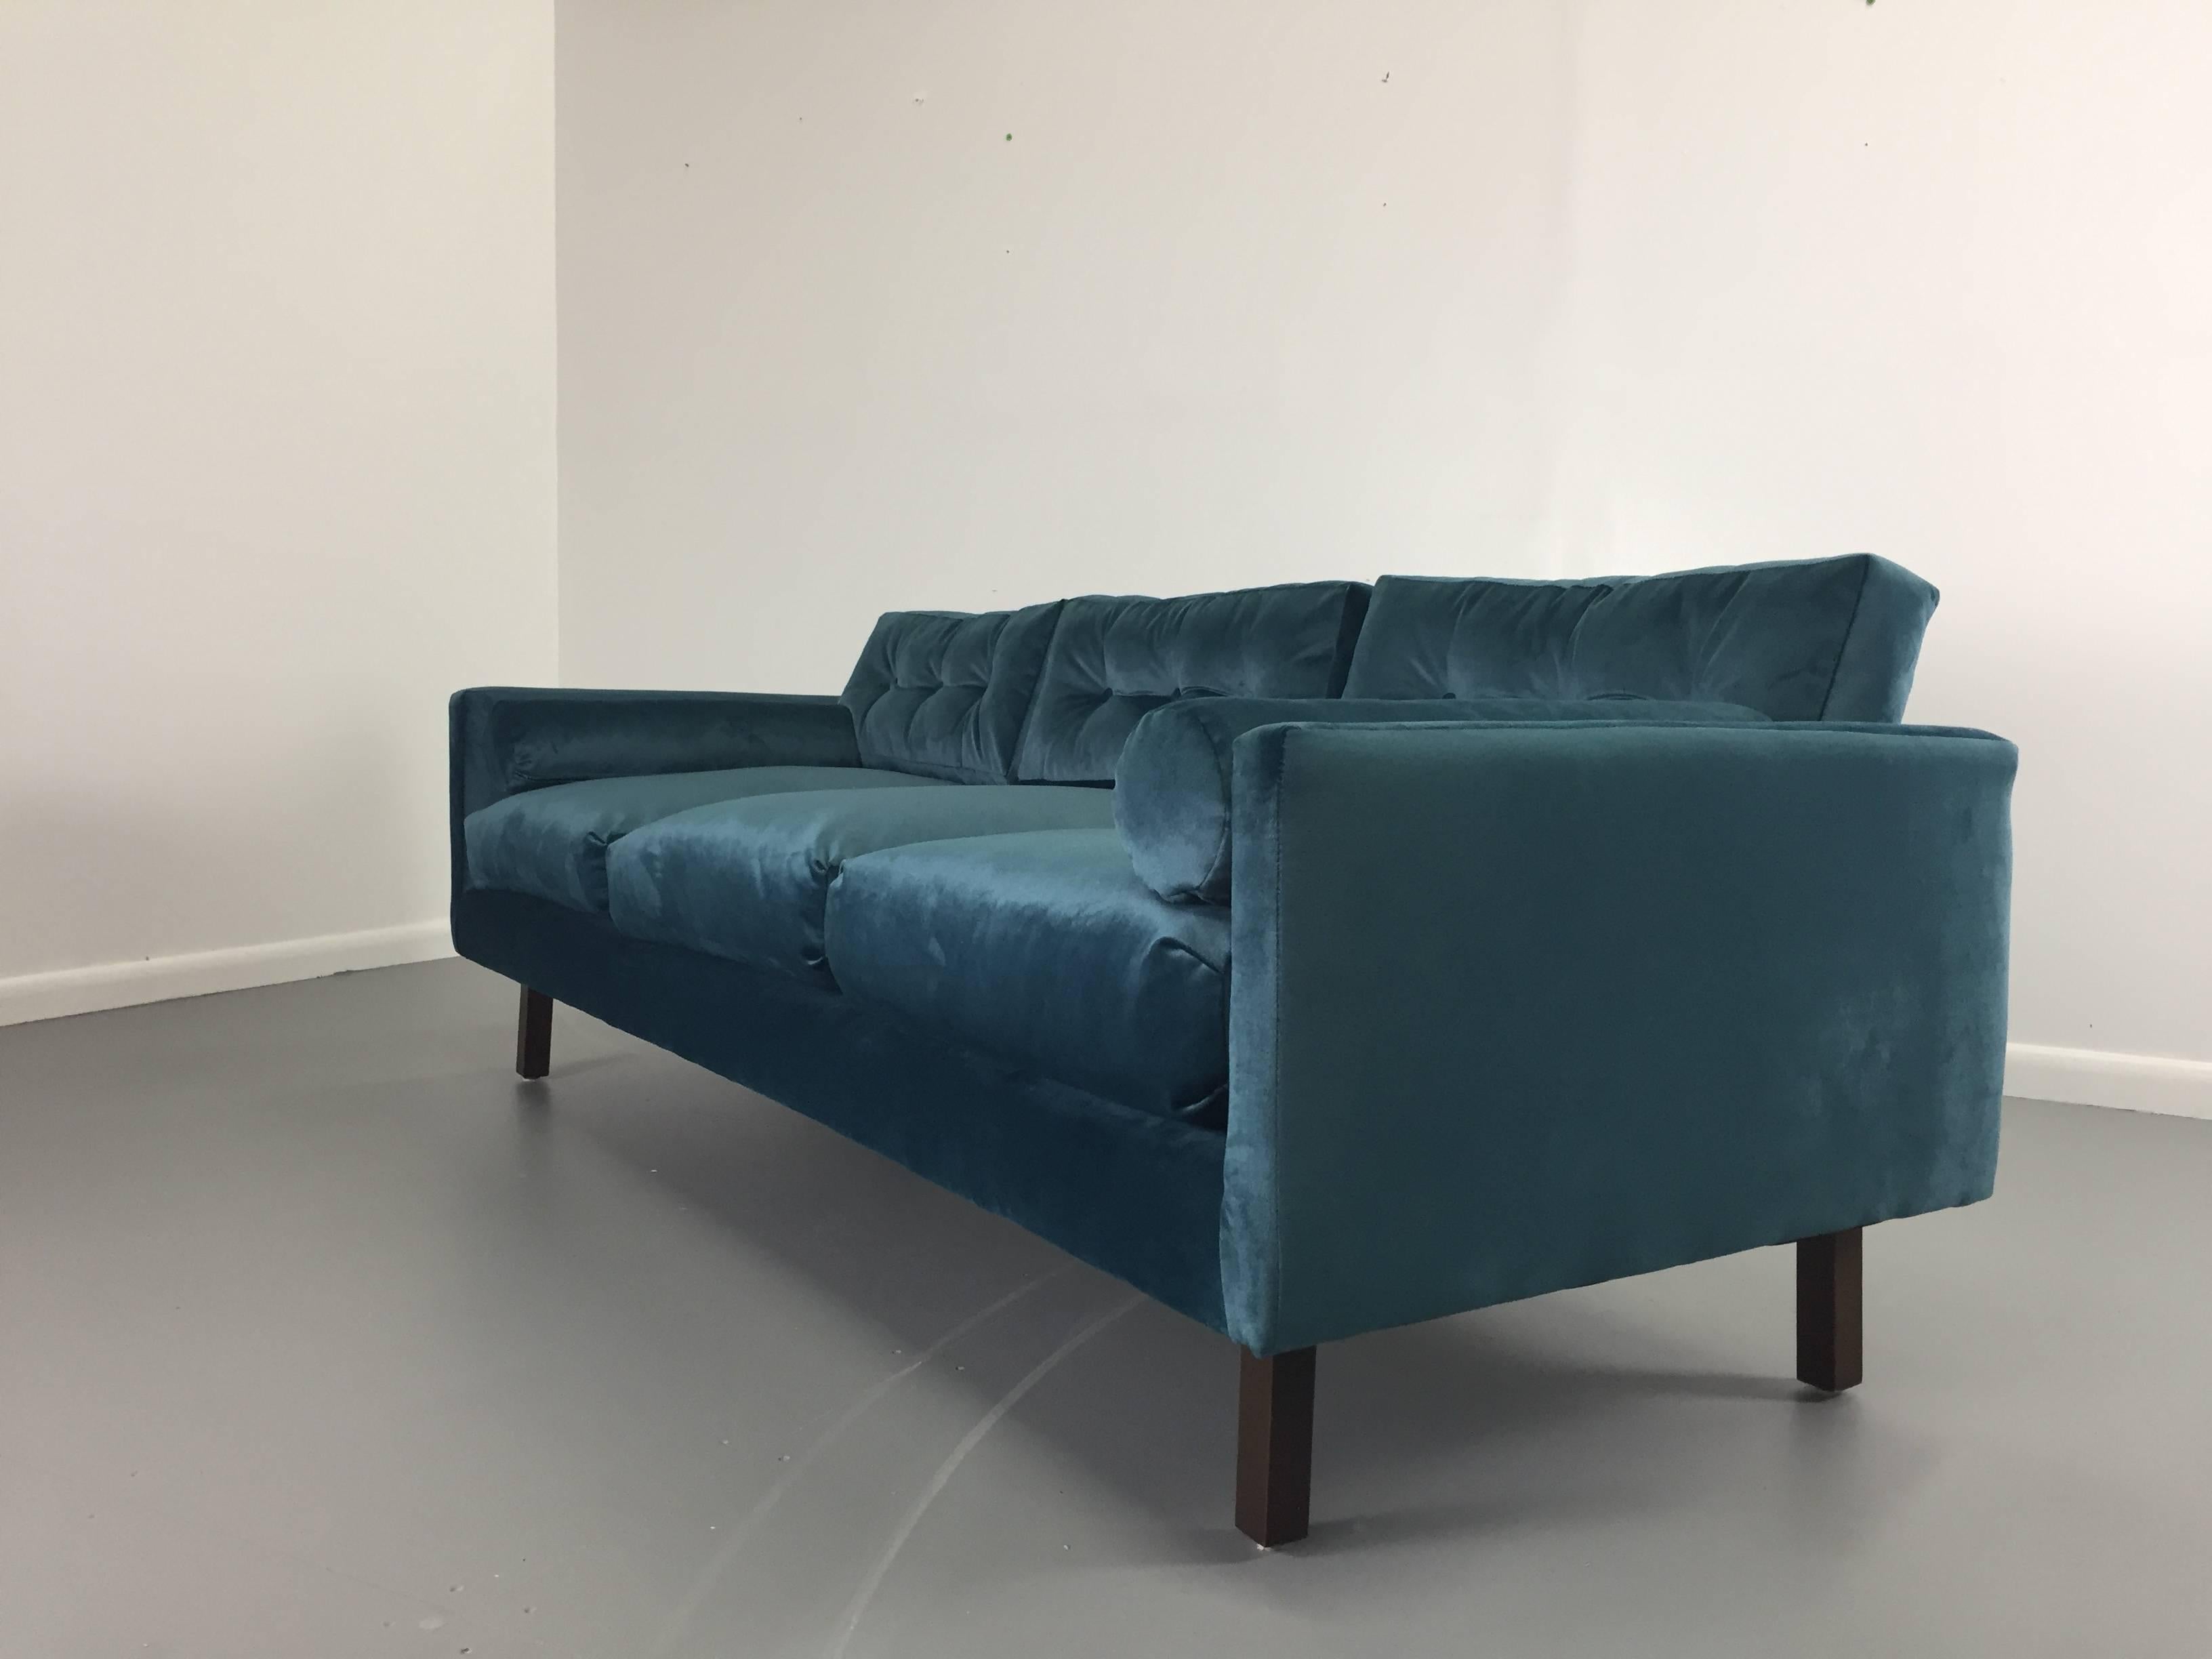 This beautiful 1960s Harvey Probber sofa has been completely refinished and reupholstered in a lovely peacock colored velvet and fitted with down or foam filled pillows.